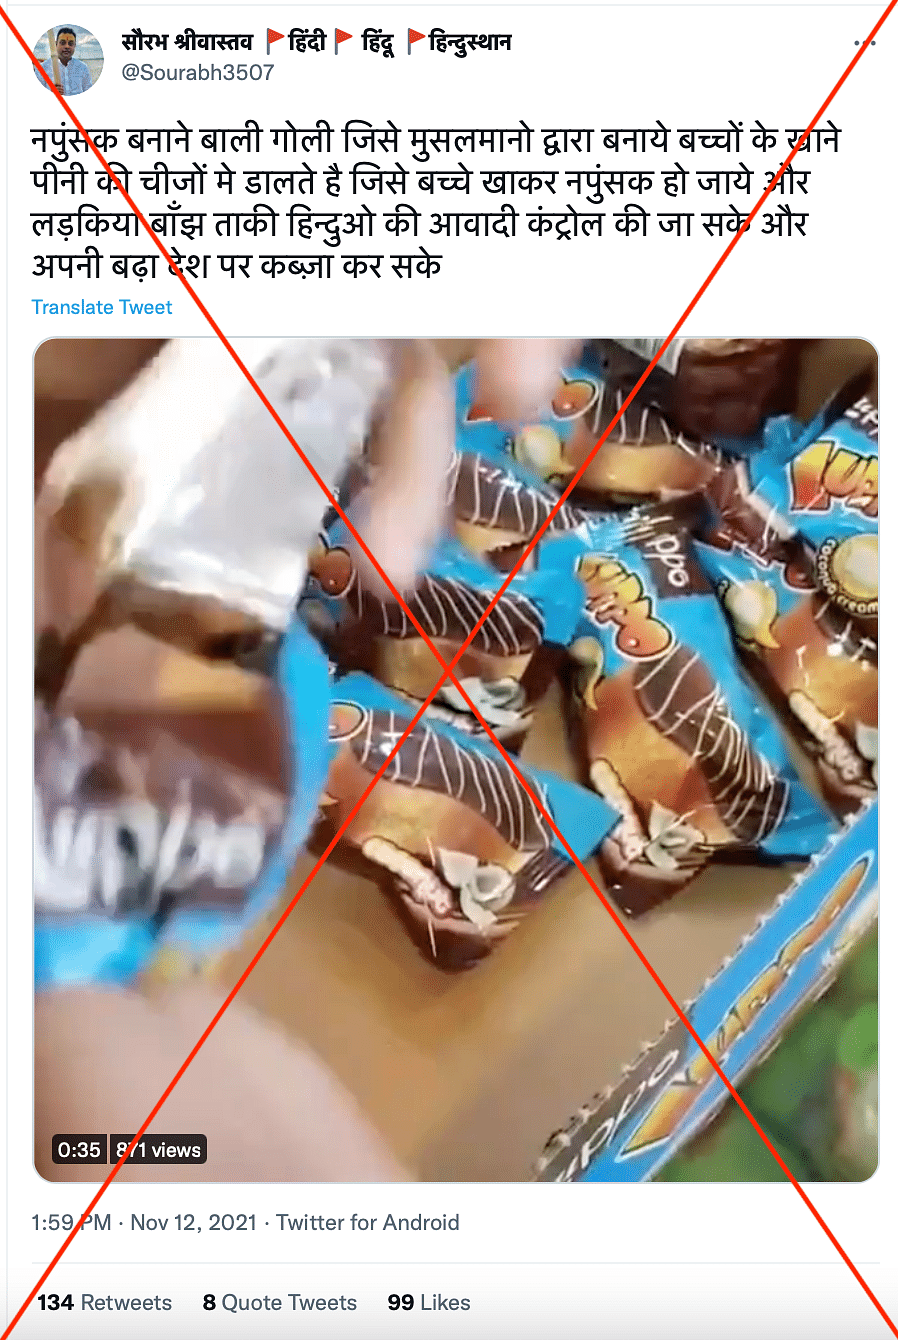 We could trace the video back to 2019 when it was shared with a different claim. The product is not sold in India.